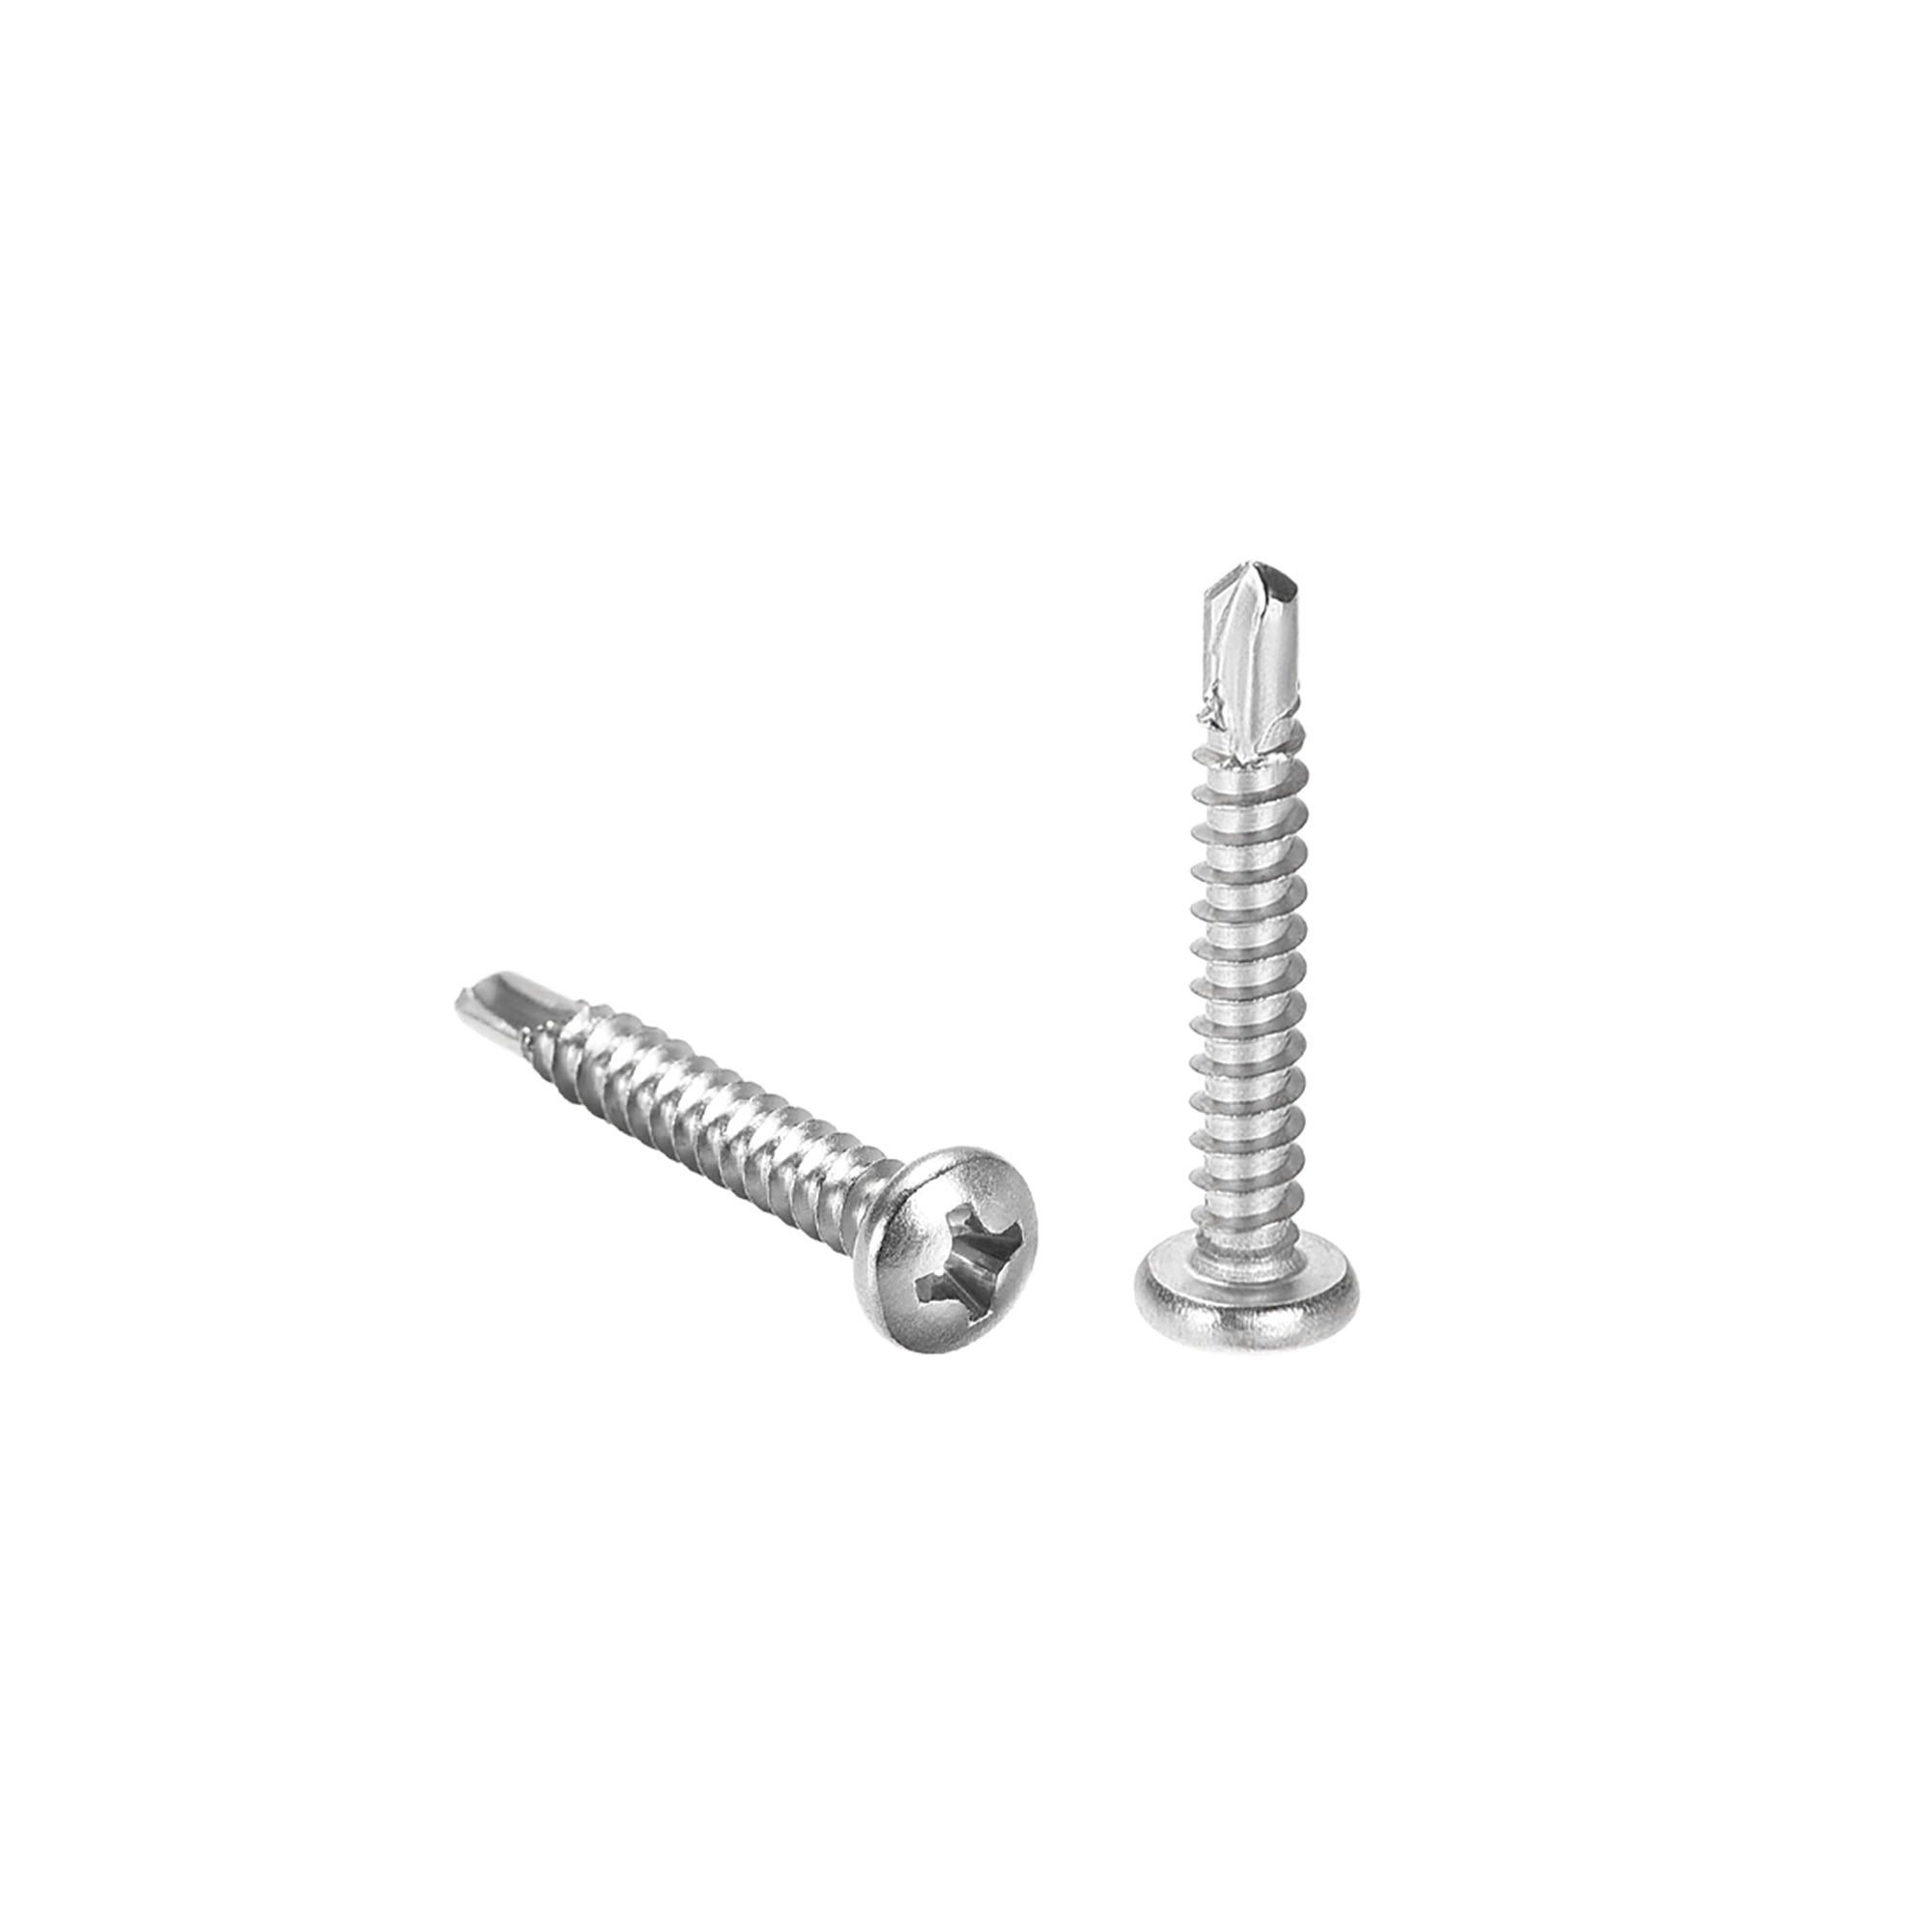 100 pcs TypeA #14 X 1-3/4 Flat Phillips Drive Self-Tapping Sheet Metal Screws AISI 304 Stainless Steel 18-8 